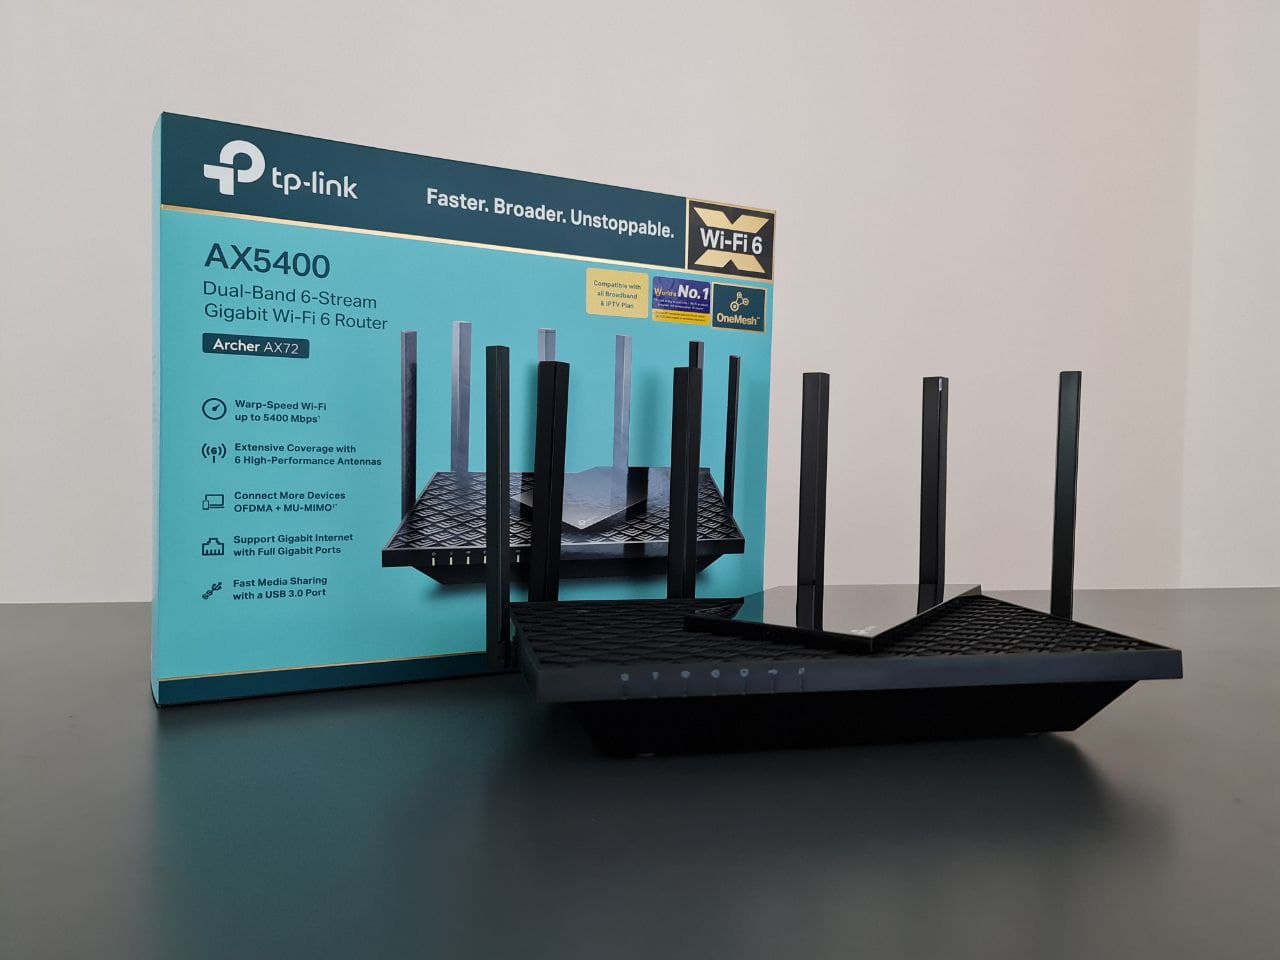 Geek Review: TP-Link Archer AX72 Router - Built for competent performance